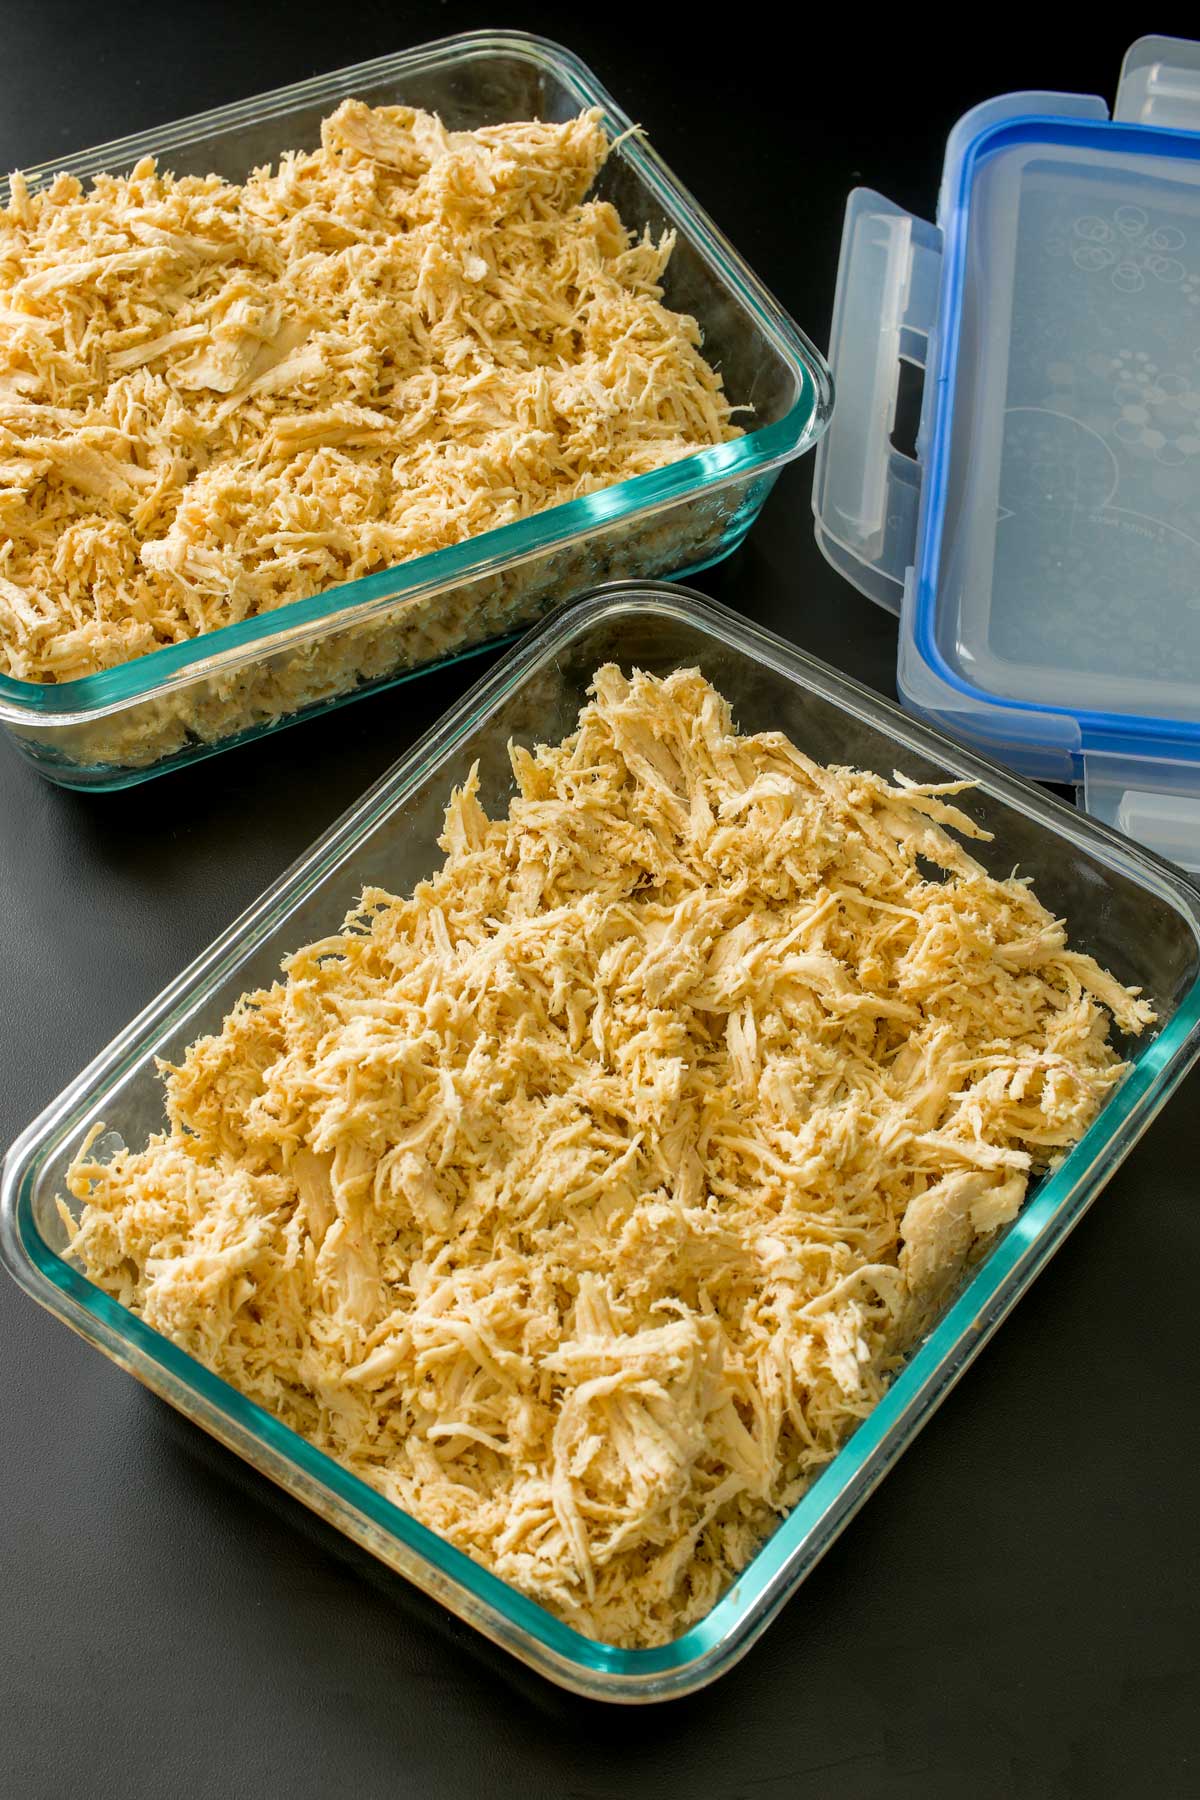 shredded chicken in glass storage containers on table next to blue lids.